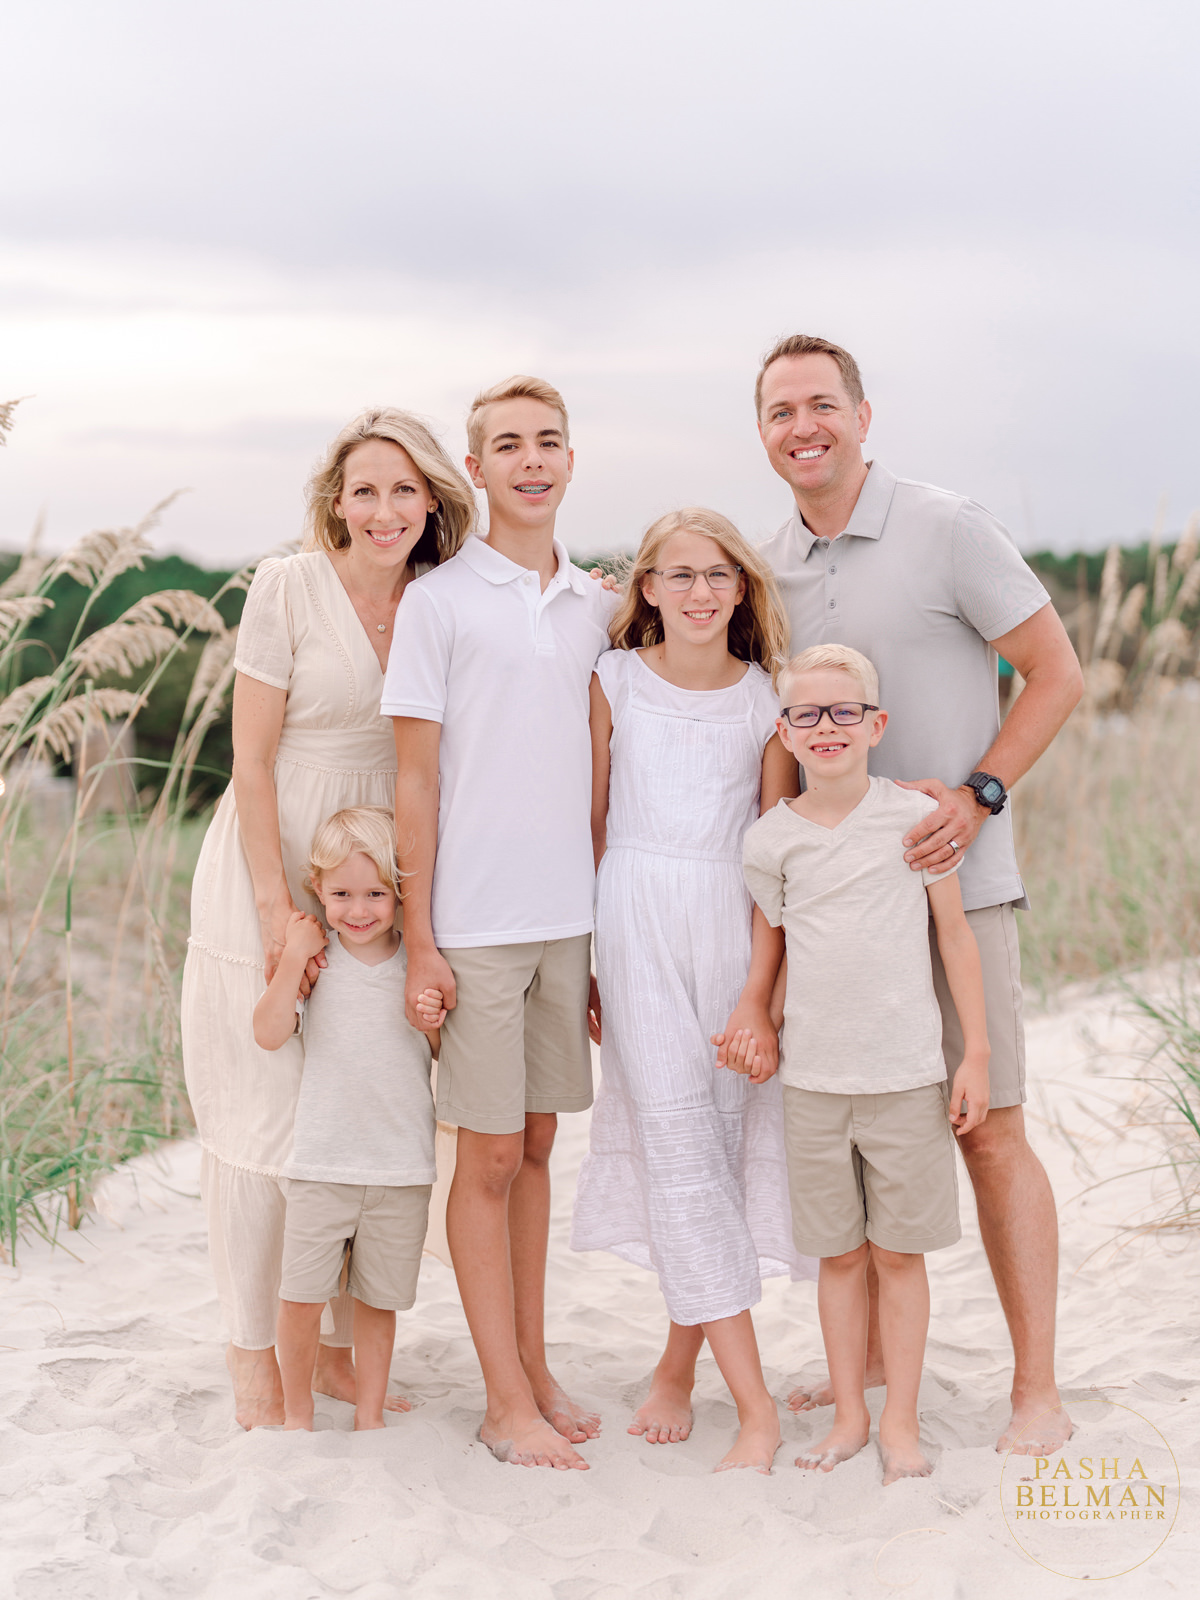 Neutral Creamy Look 1 70+ Best Chosen Family Photo Outfit Ideas in Summer - 30